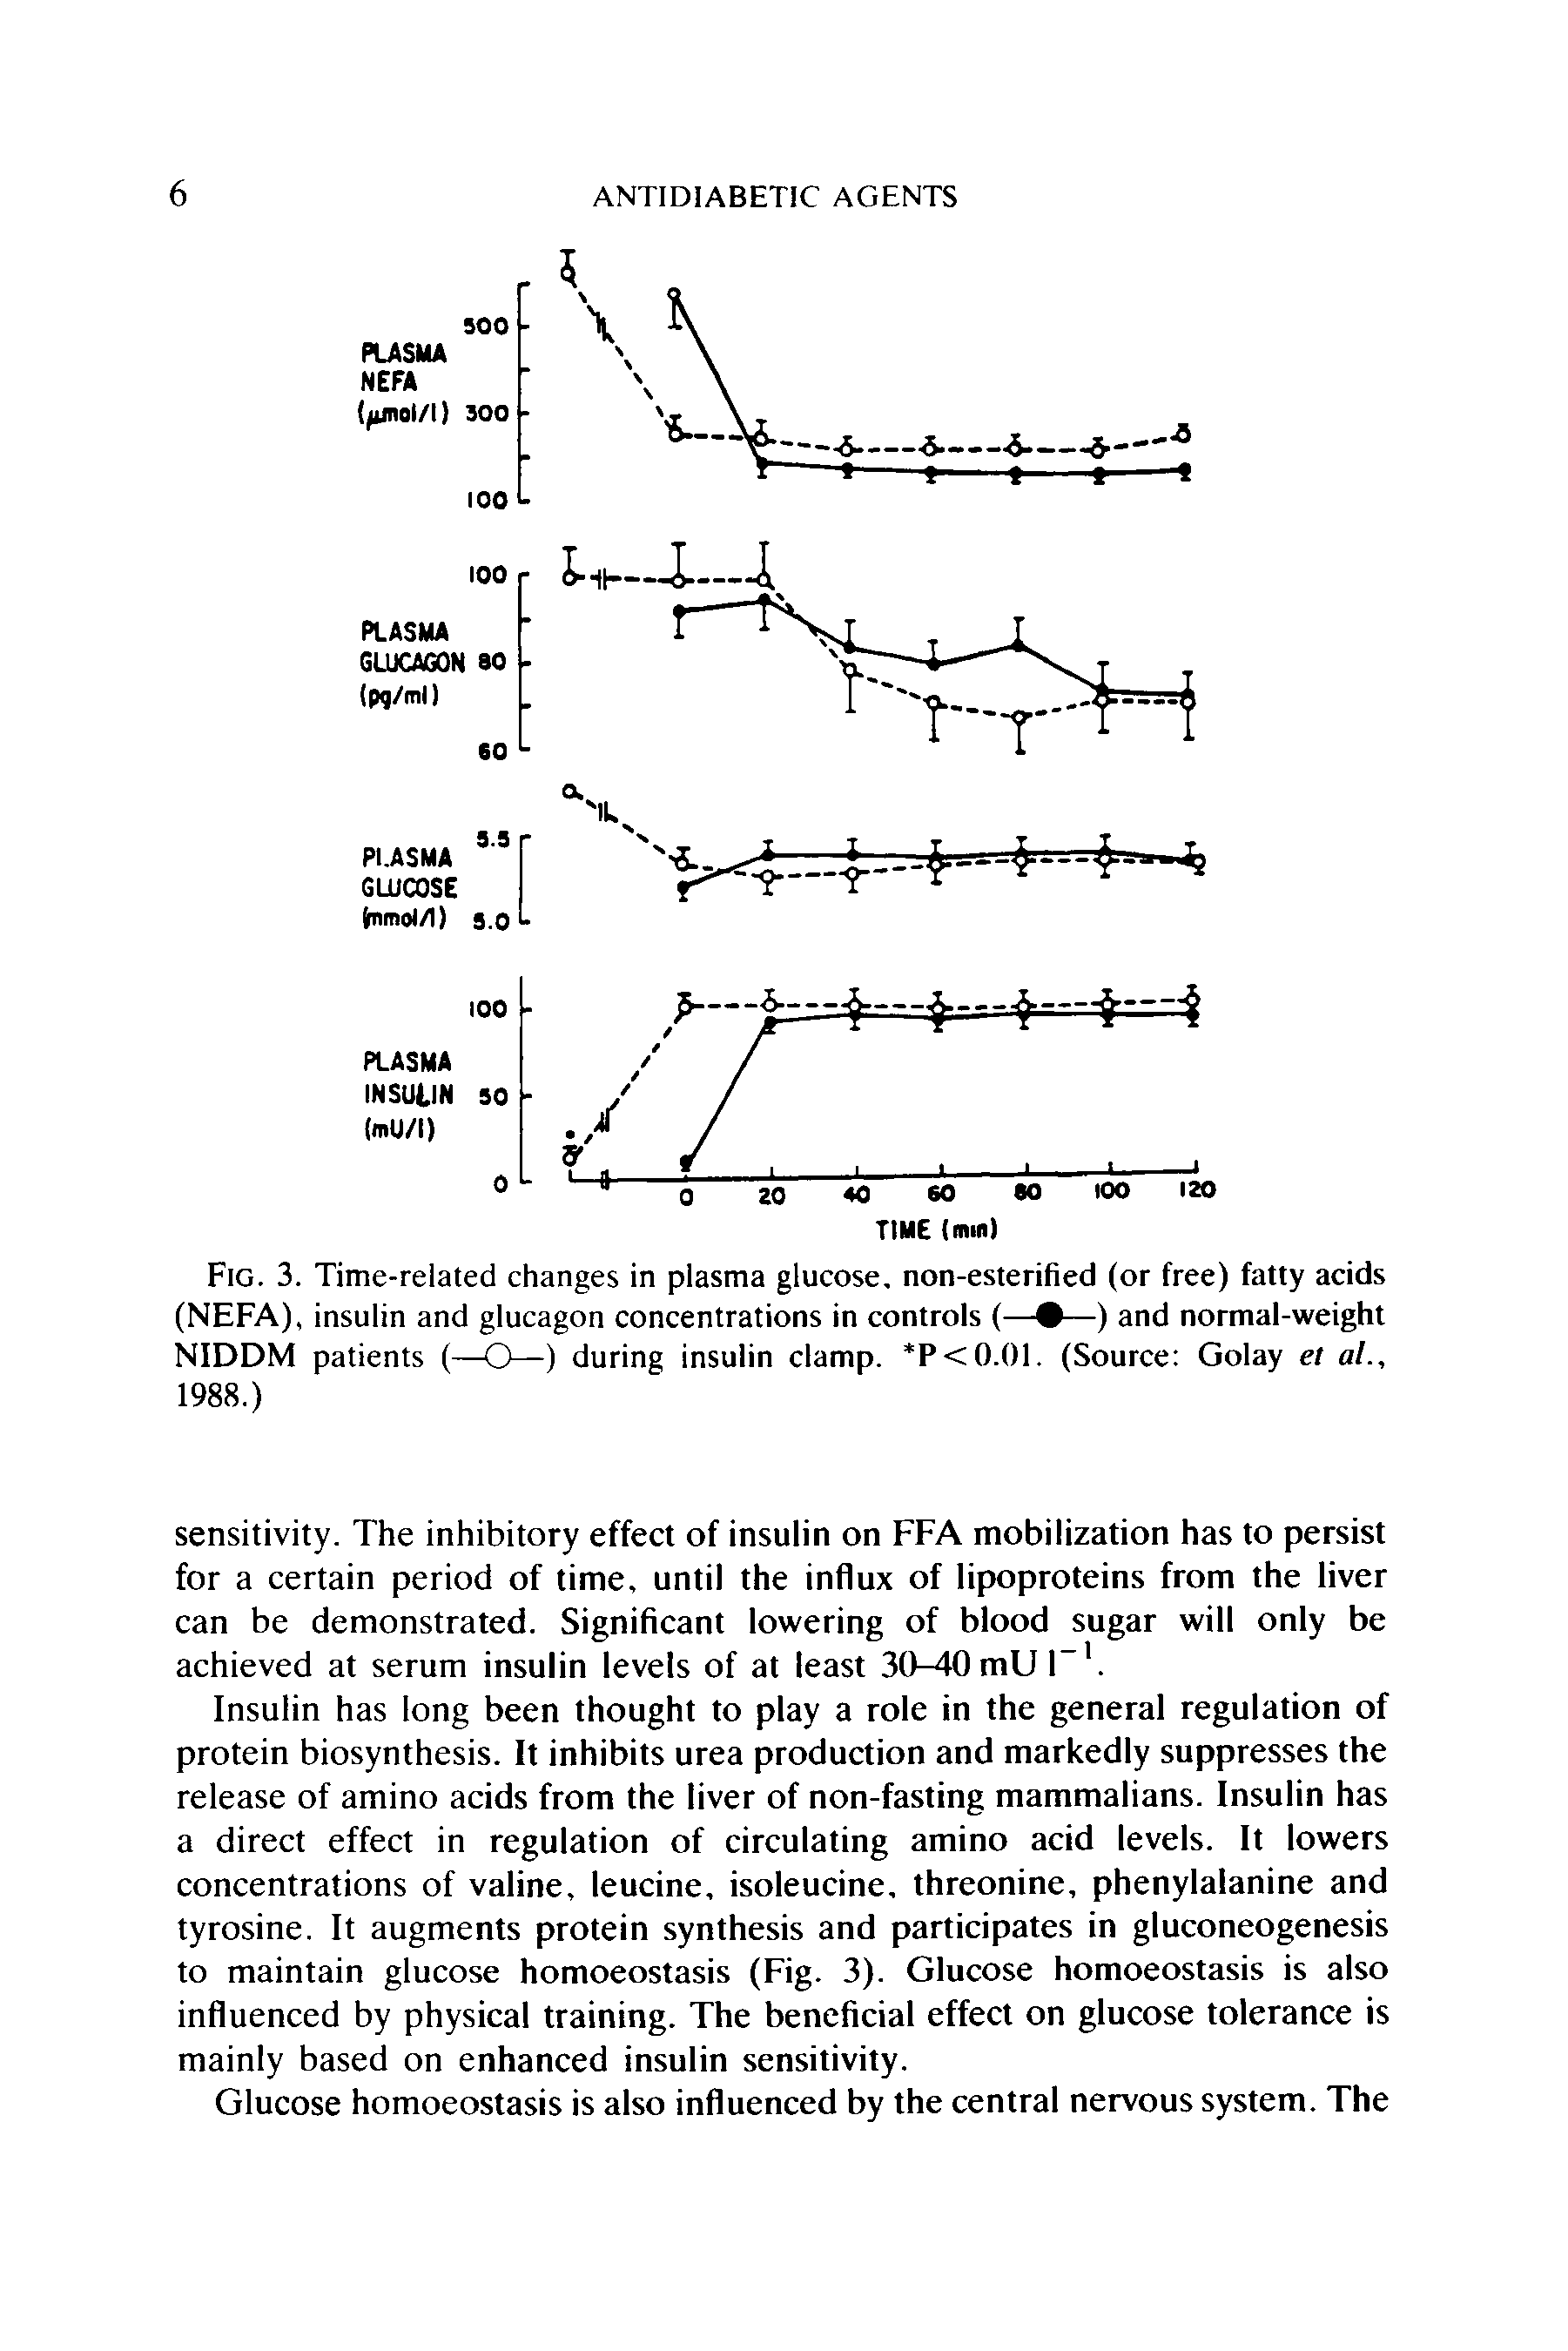 Fig. 3. Time-related changes in plasma glucose, non-esterified (or free) fatty acids (NEFA), insulin and glucagon concentrations in controls (— —) and normal-weight NIDDM patients (—O—) during insulin clamp. P<0.()1. (Source Golay et al., 1988.)...